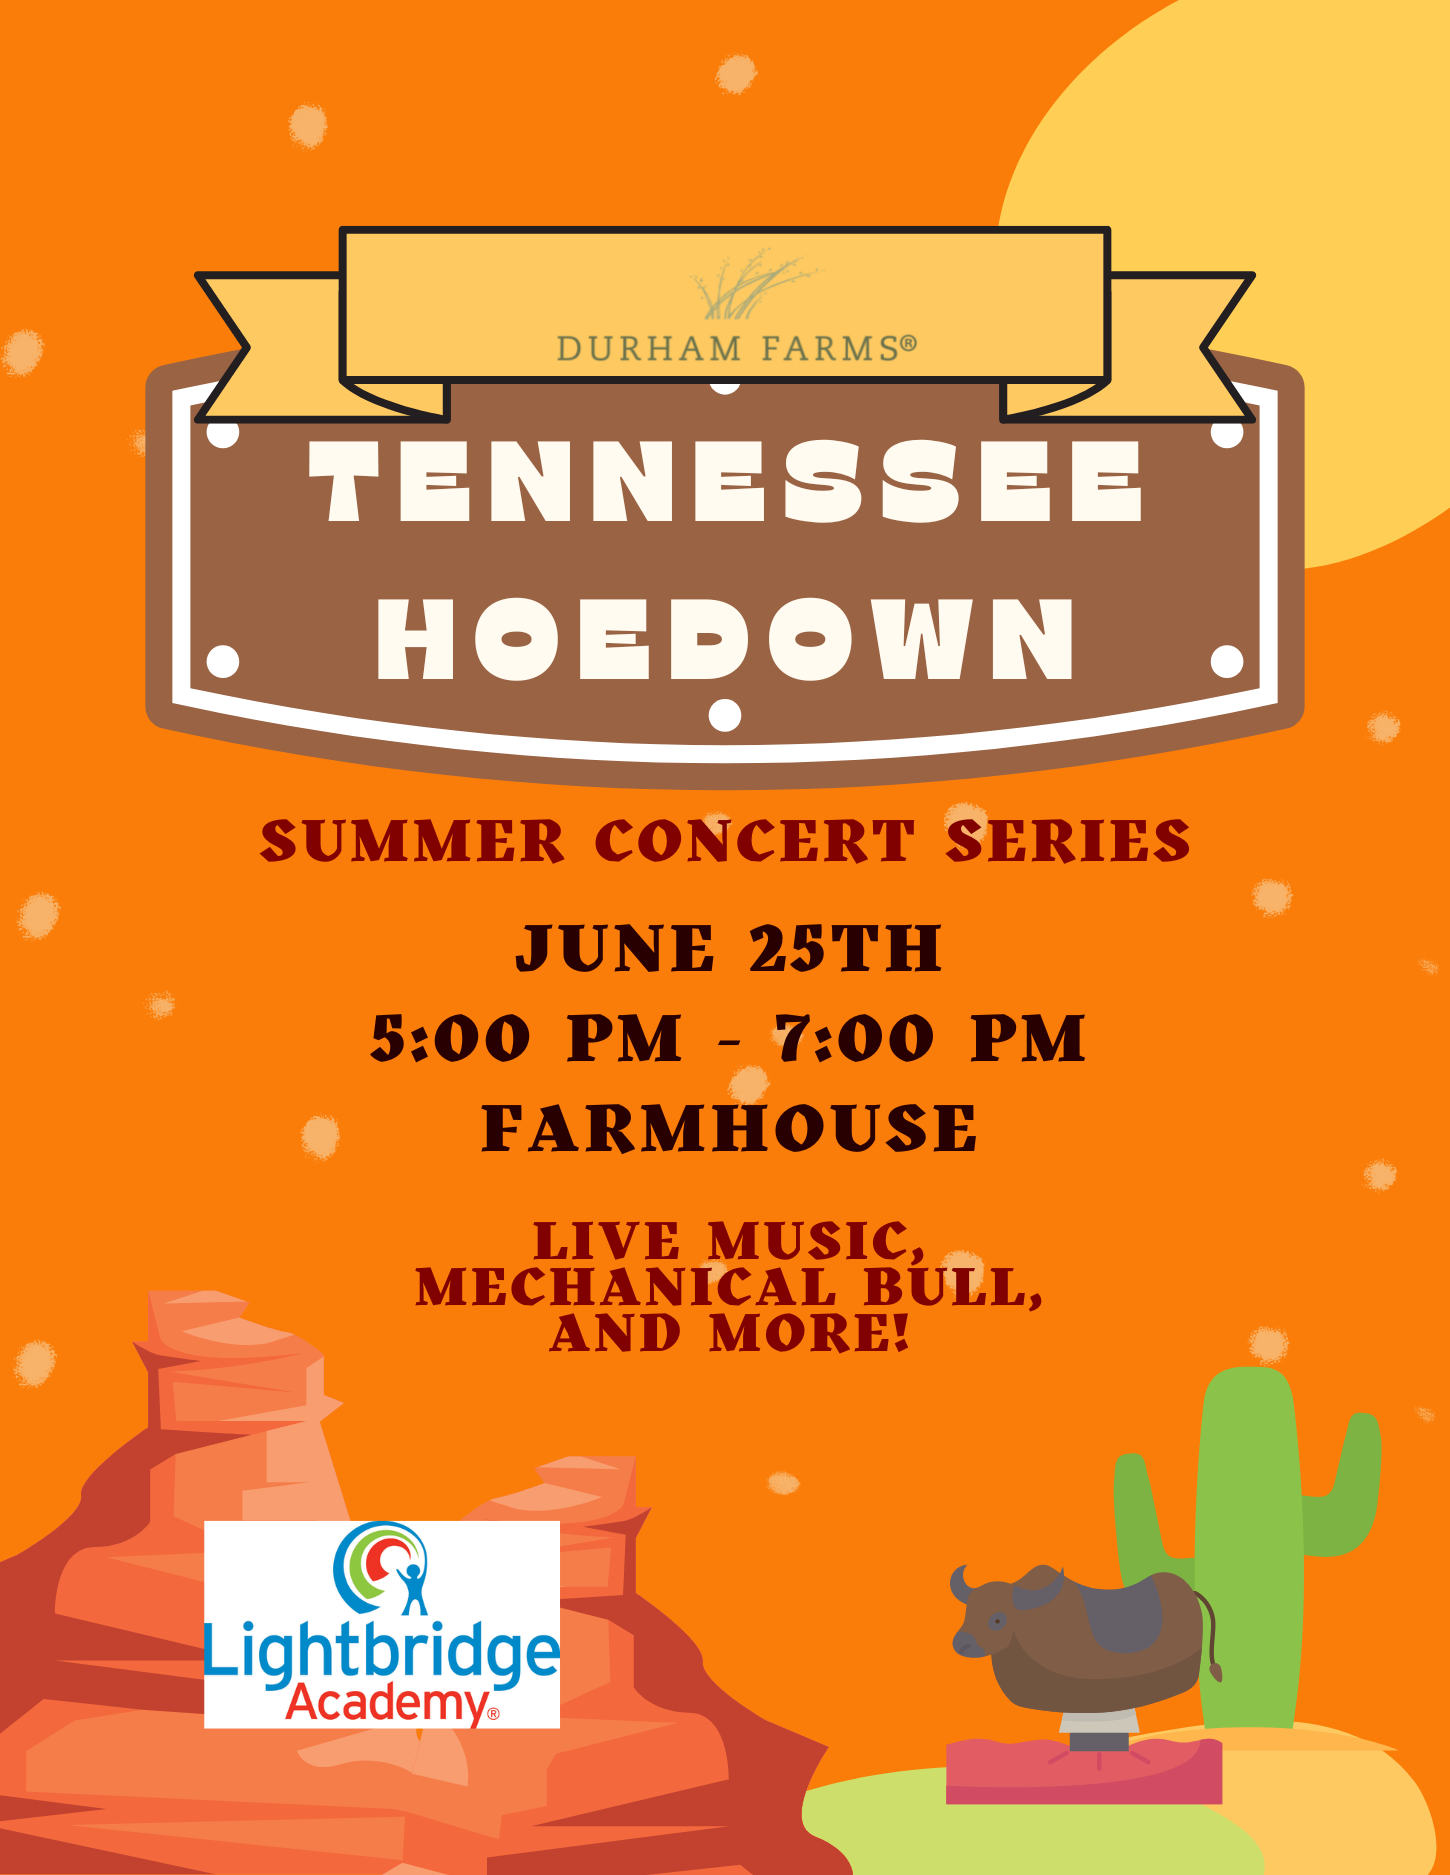 Tennessee Hoedown